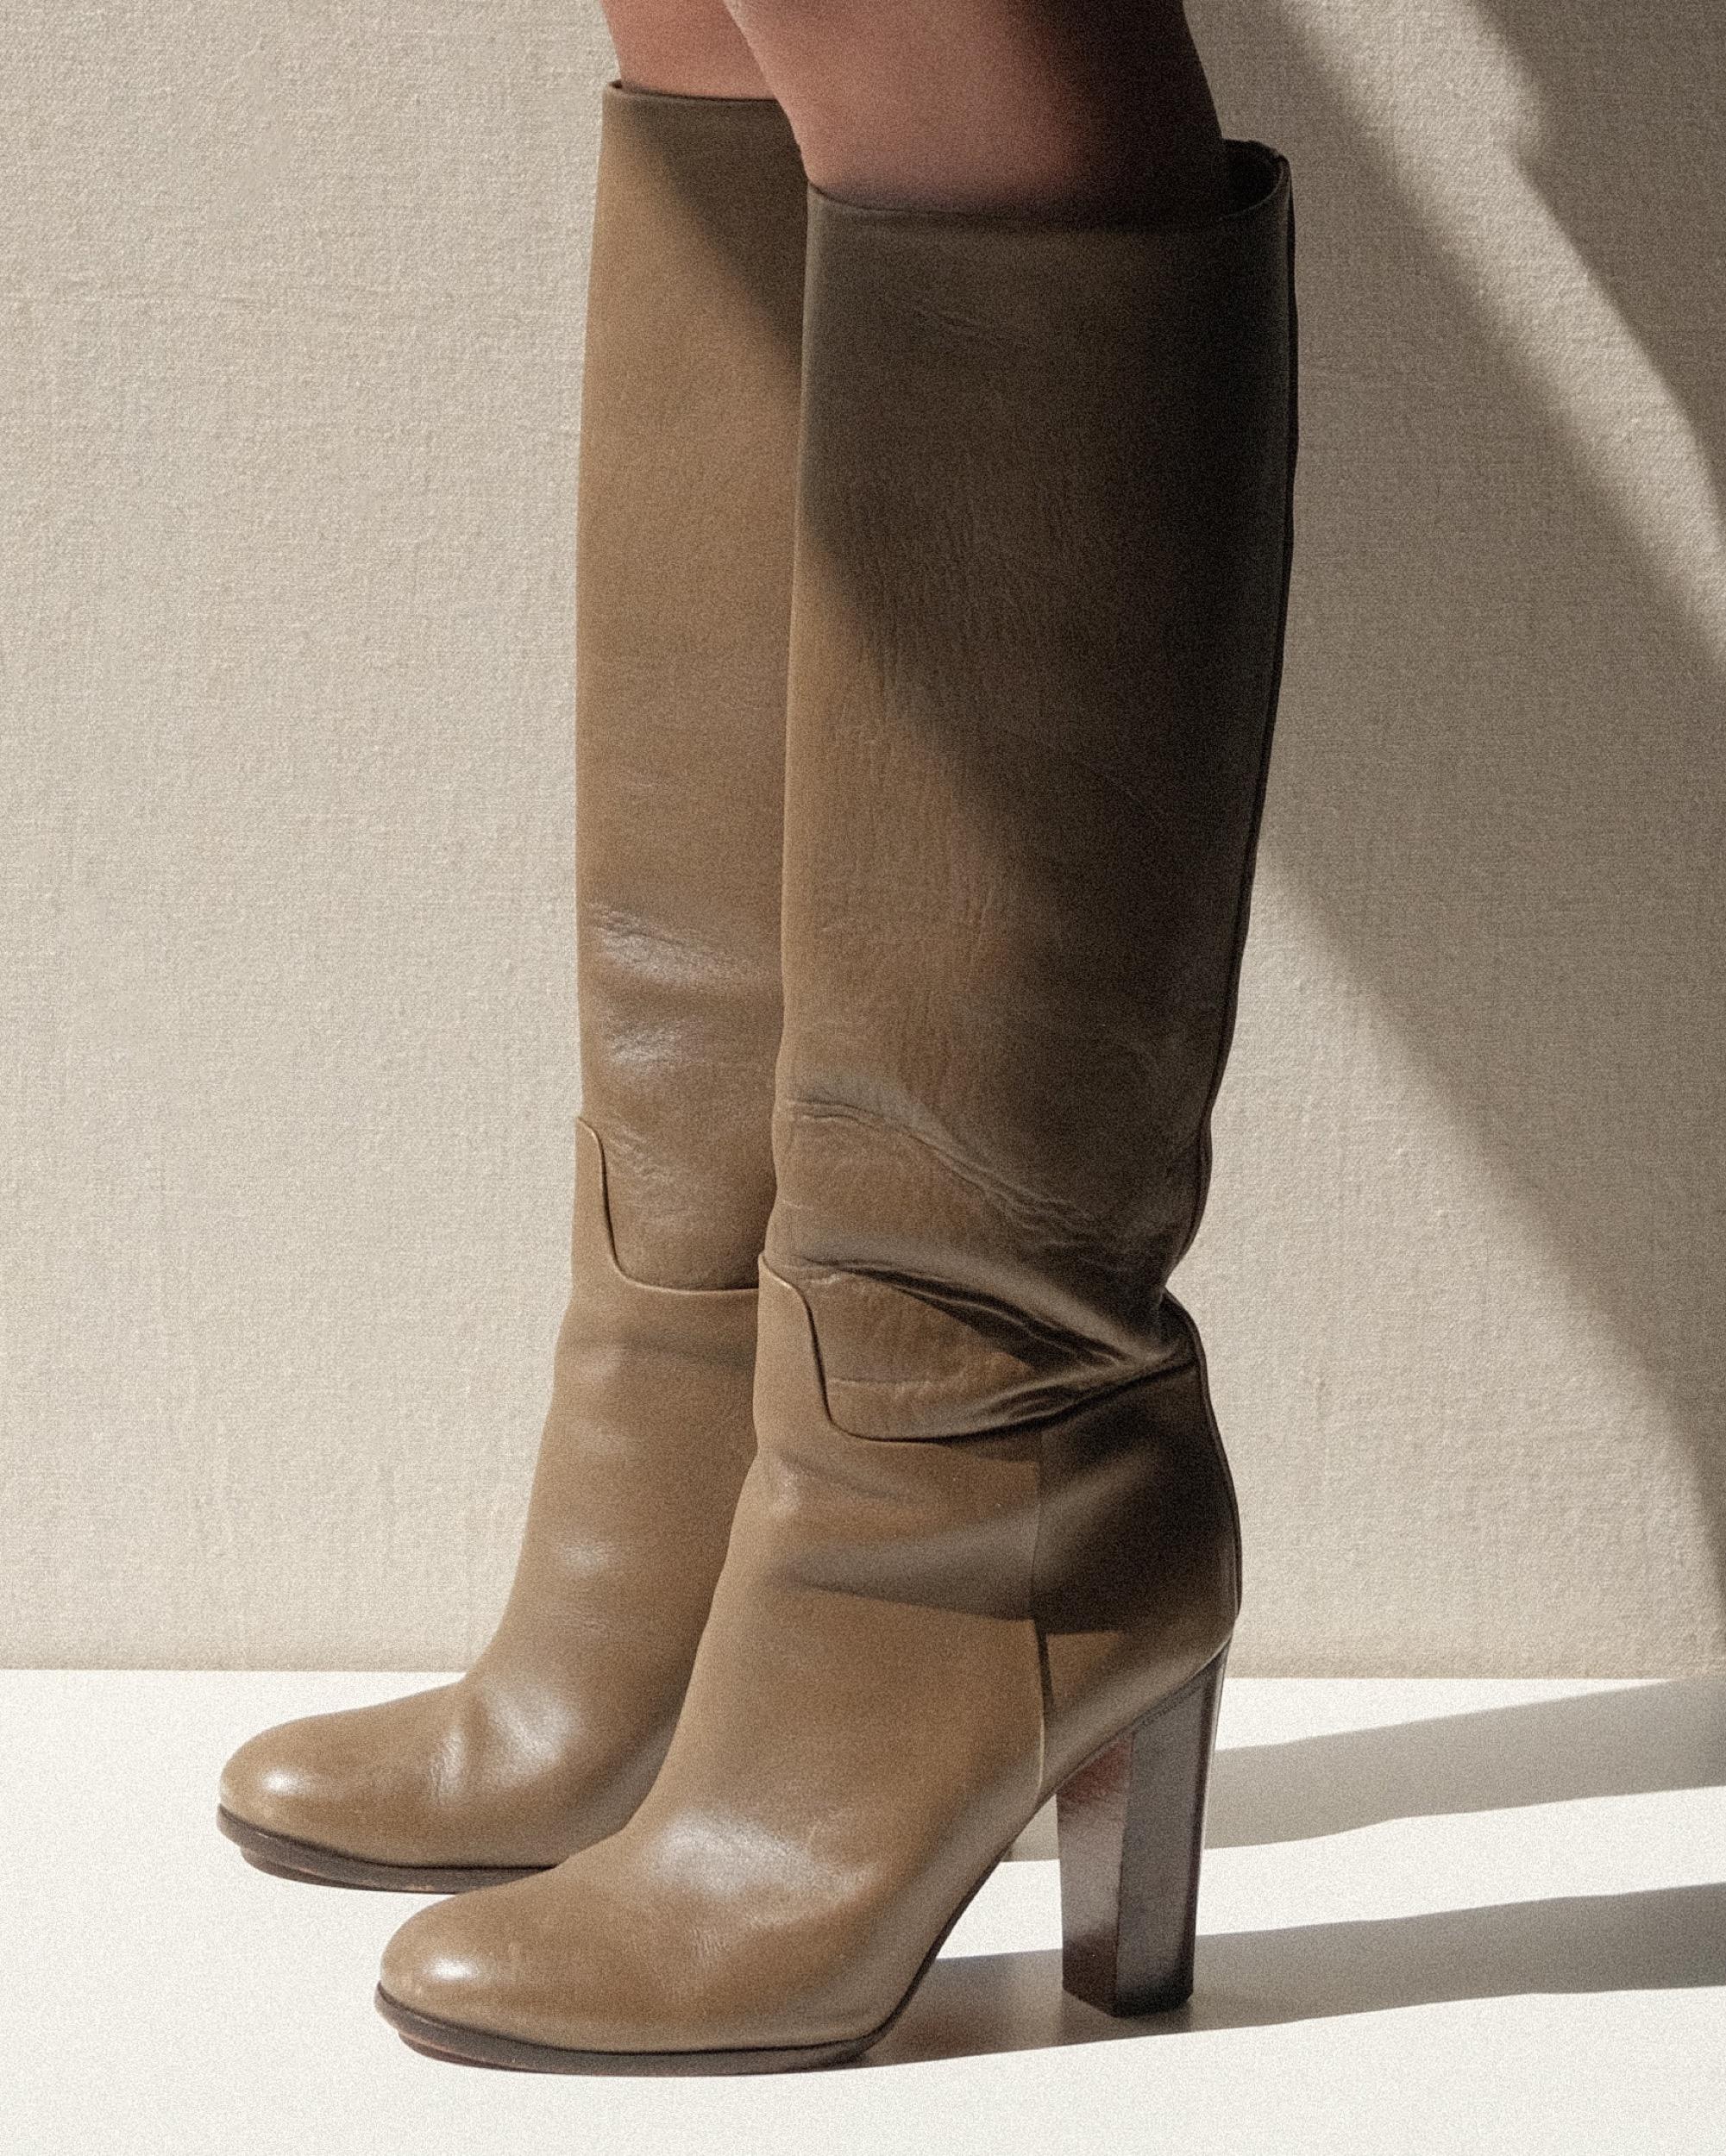 Green Leather Céline Phoebe Philo Knee High Boots 38 For Sale 1